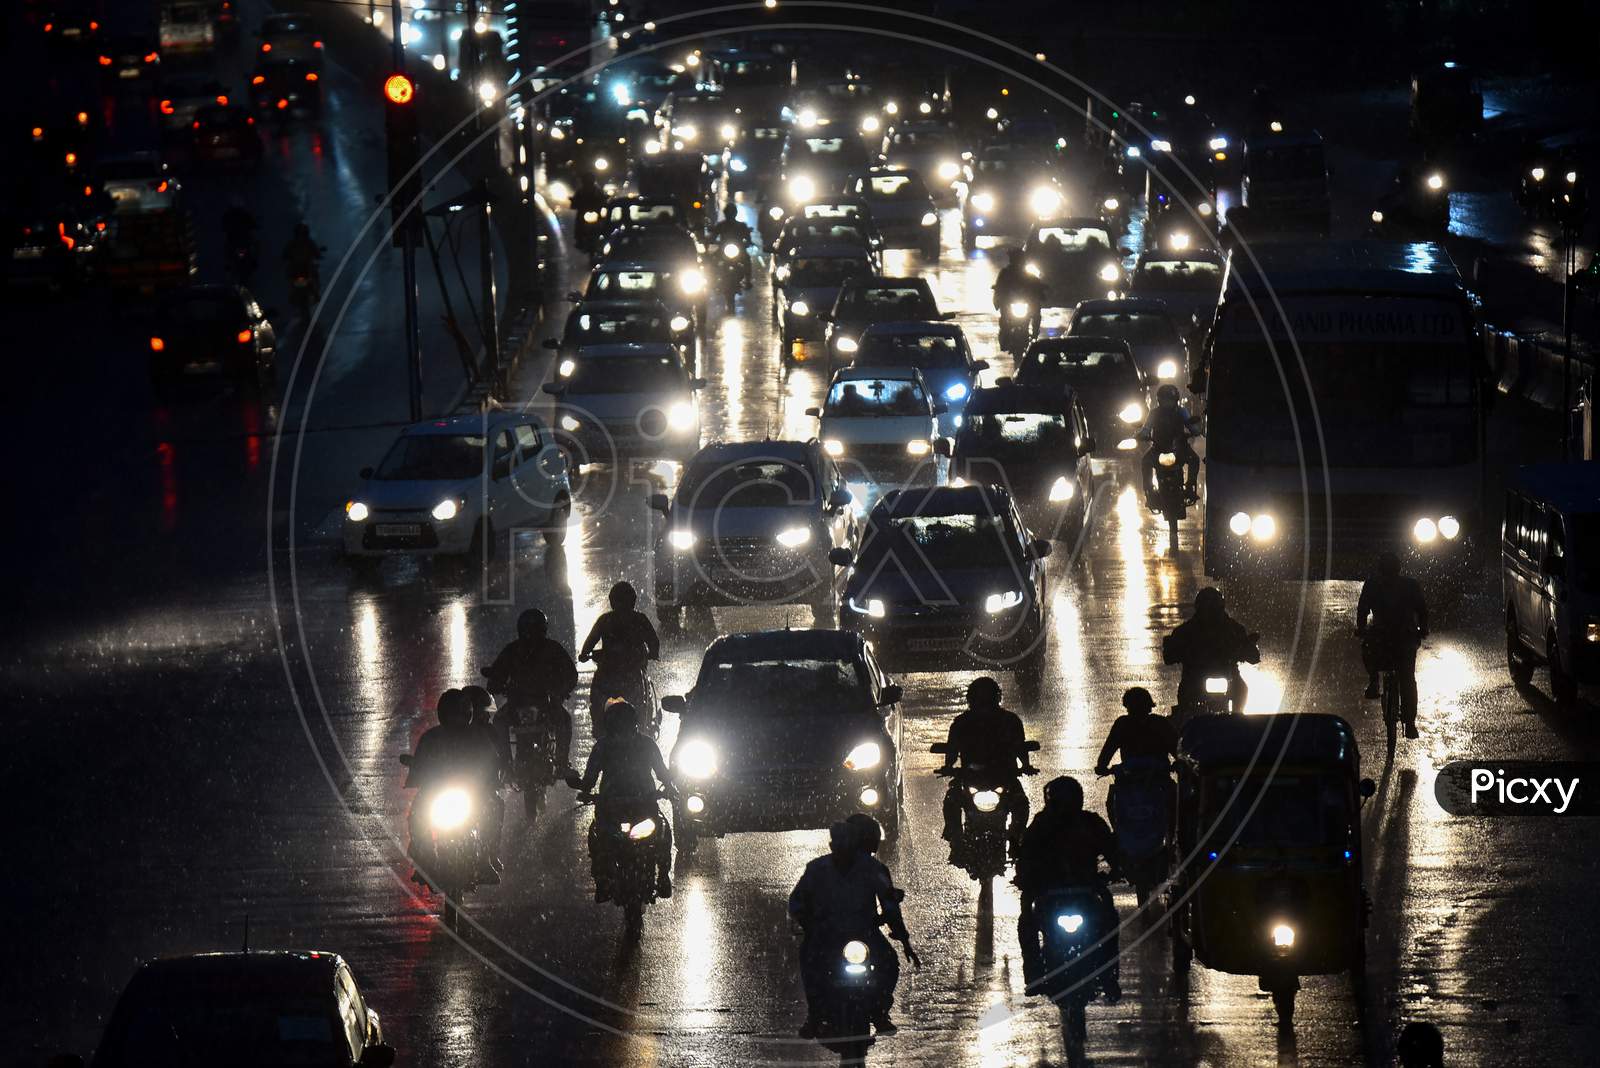 Vehicles move on road as it rains heavily in Hyderabad on September 16,2020